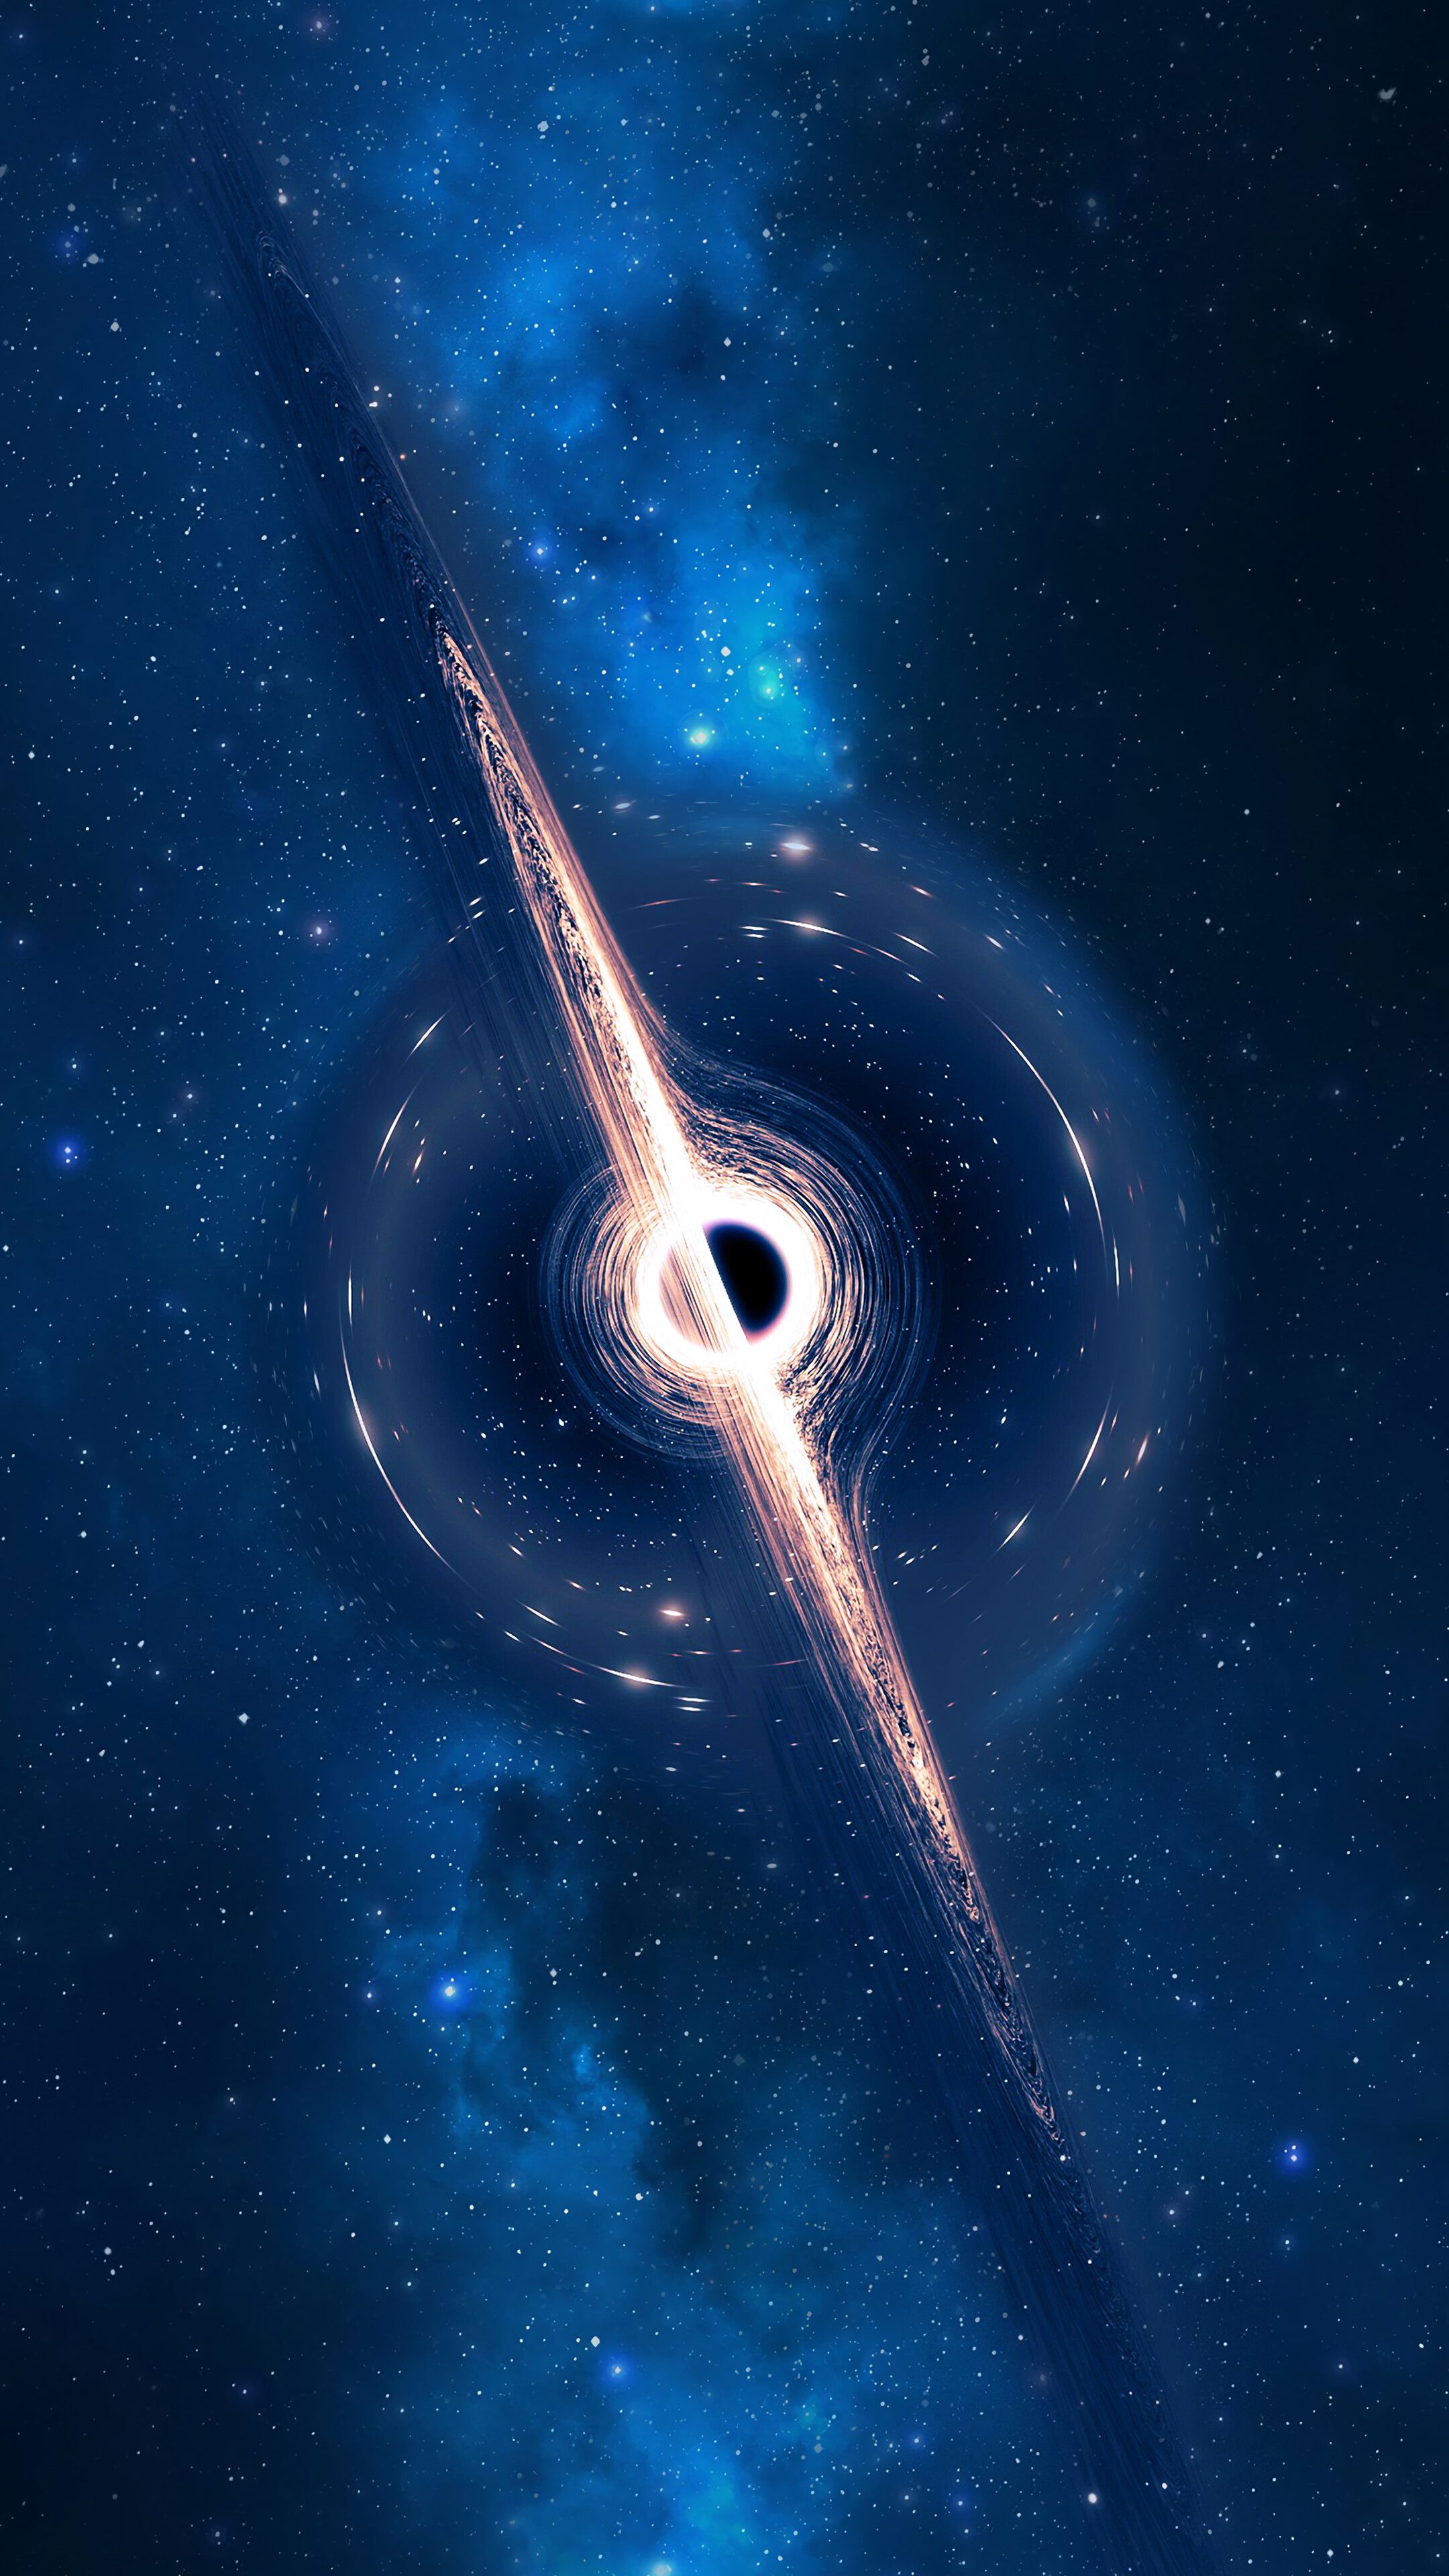 Black Hole In Space Wallpapers - Wallpaper Cave